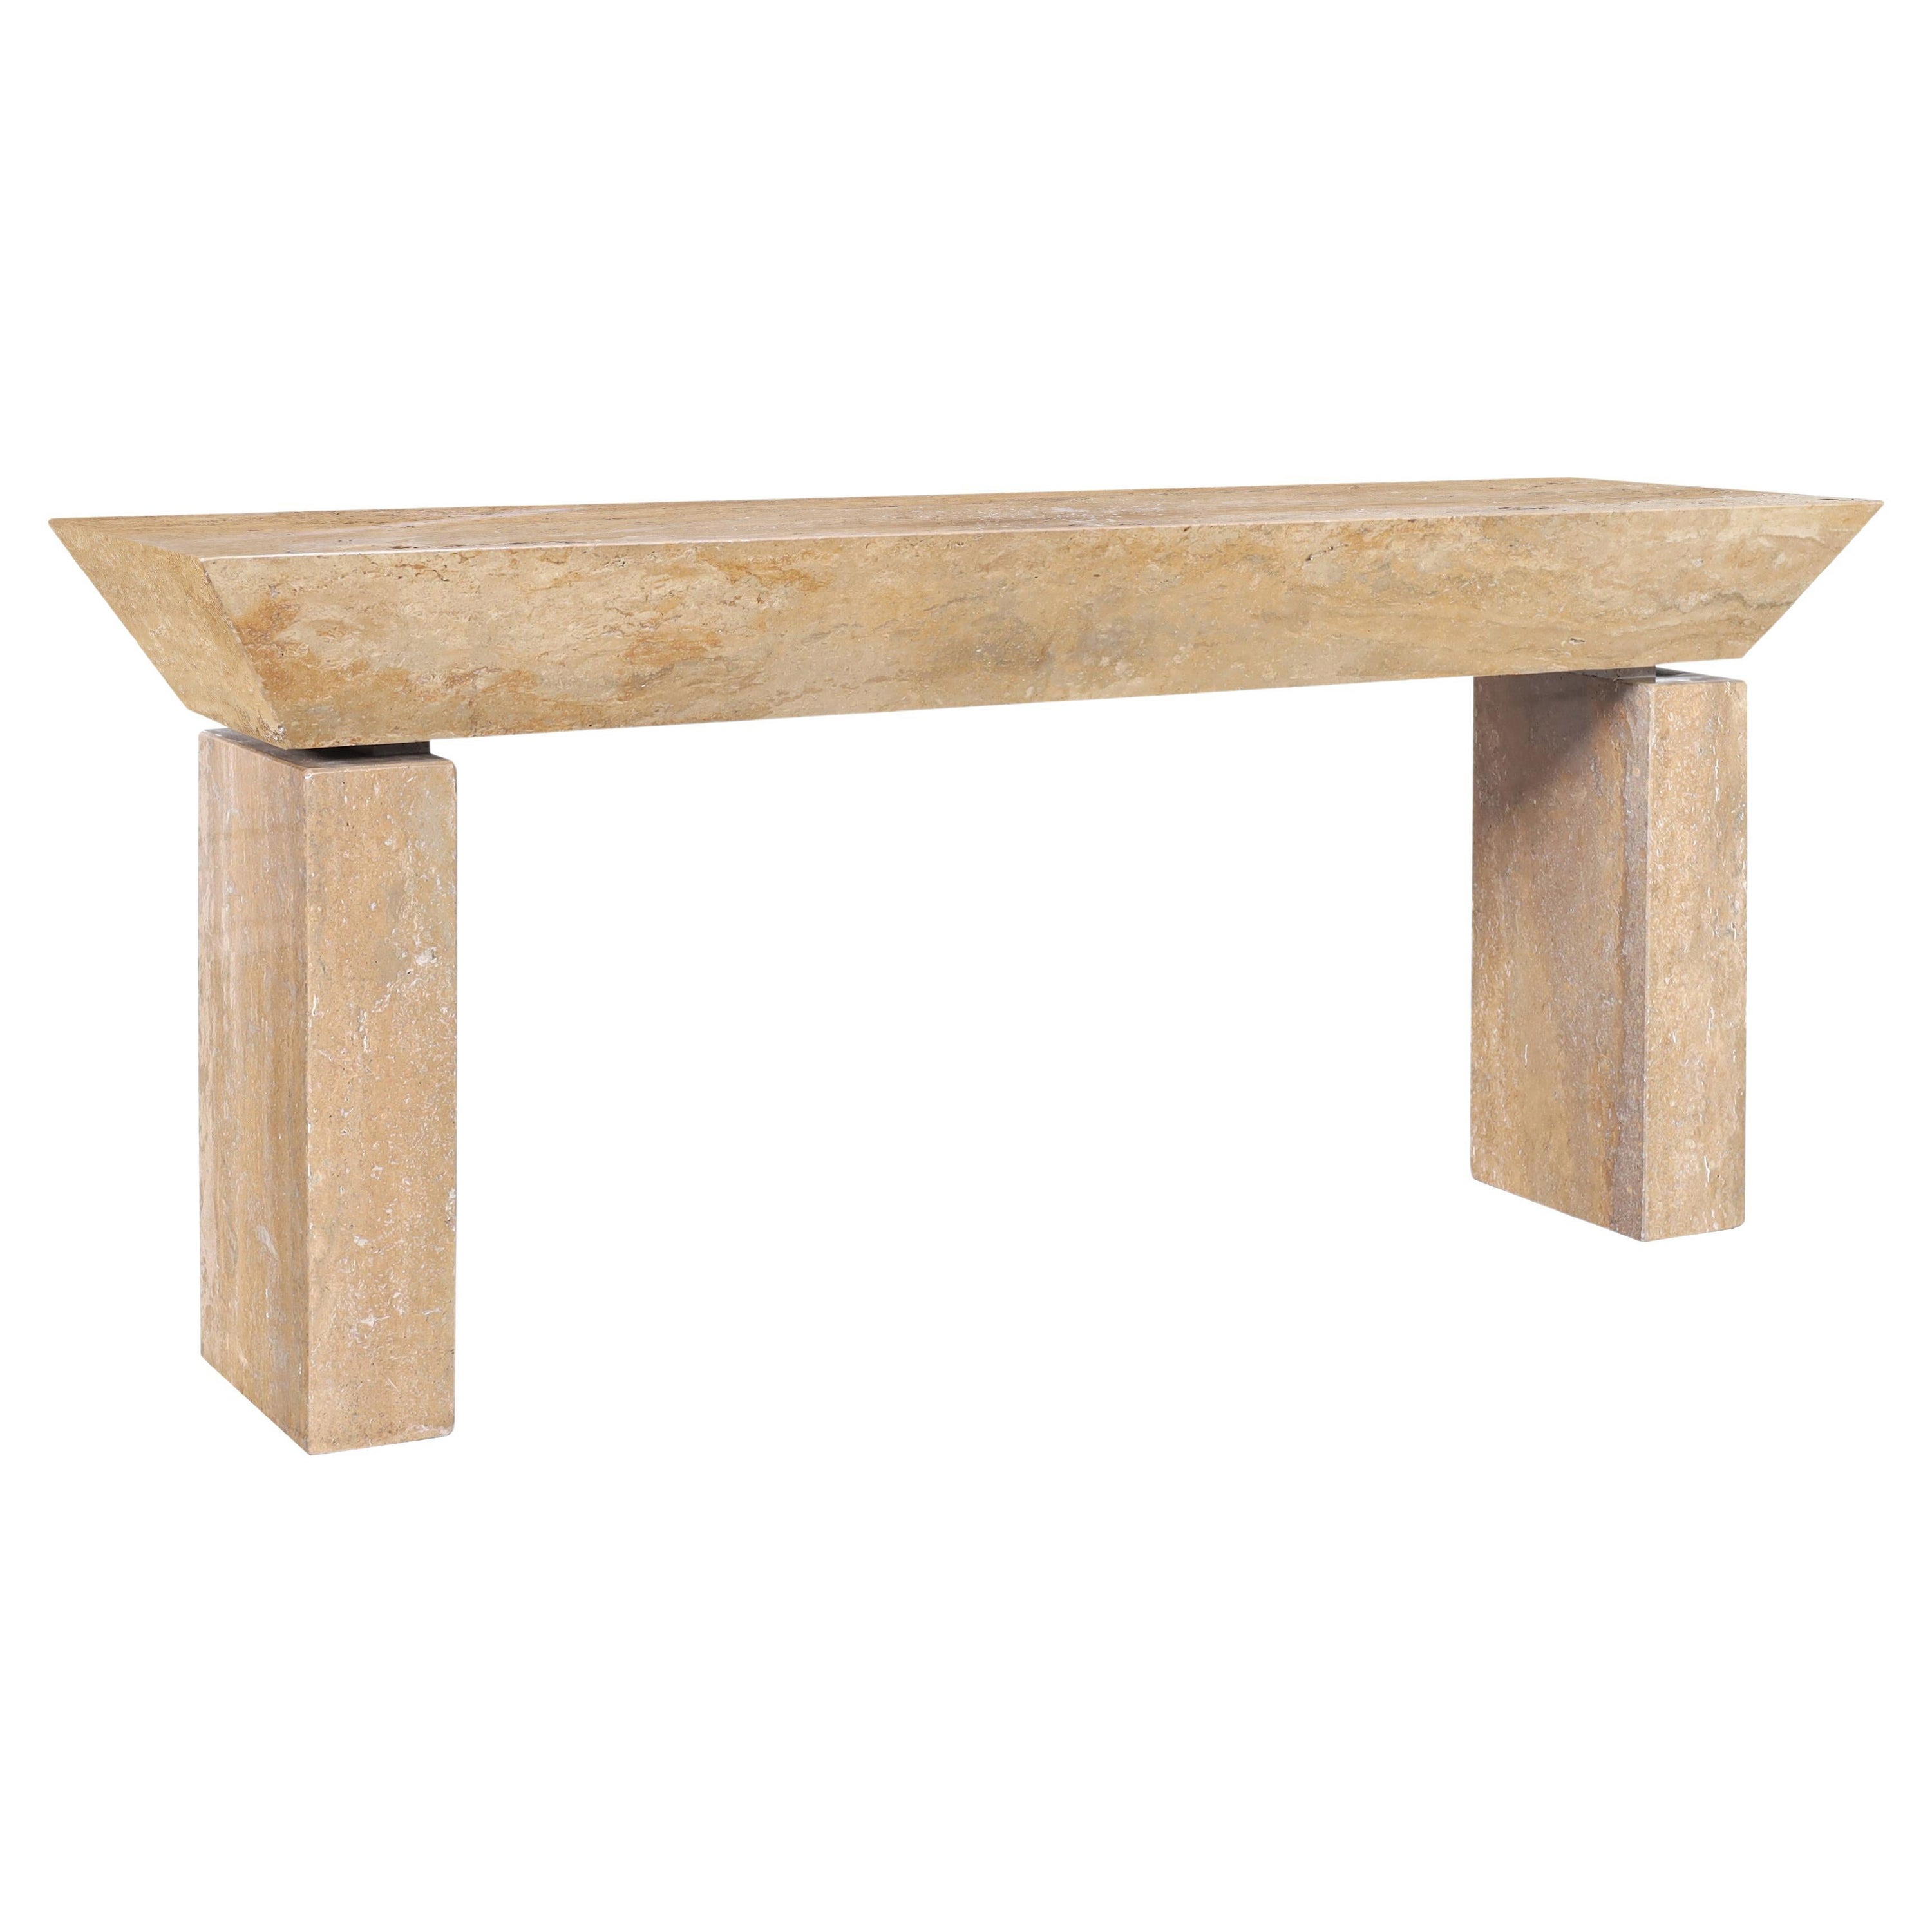 Monumental Italian Travertine Console Table, 2 Available